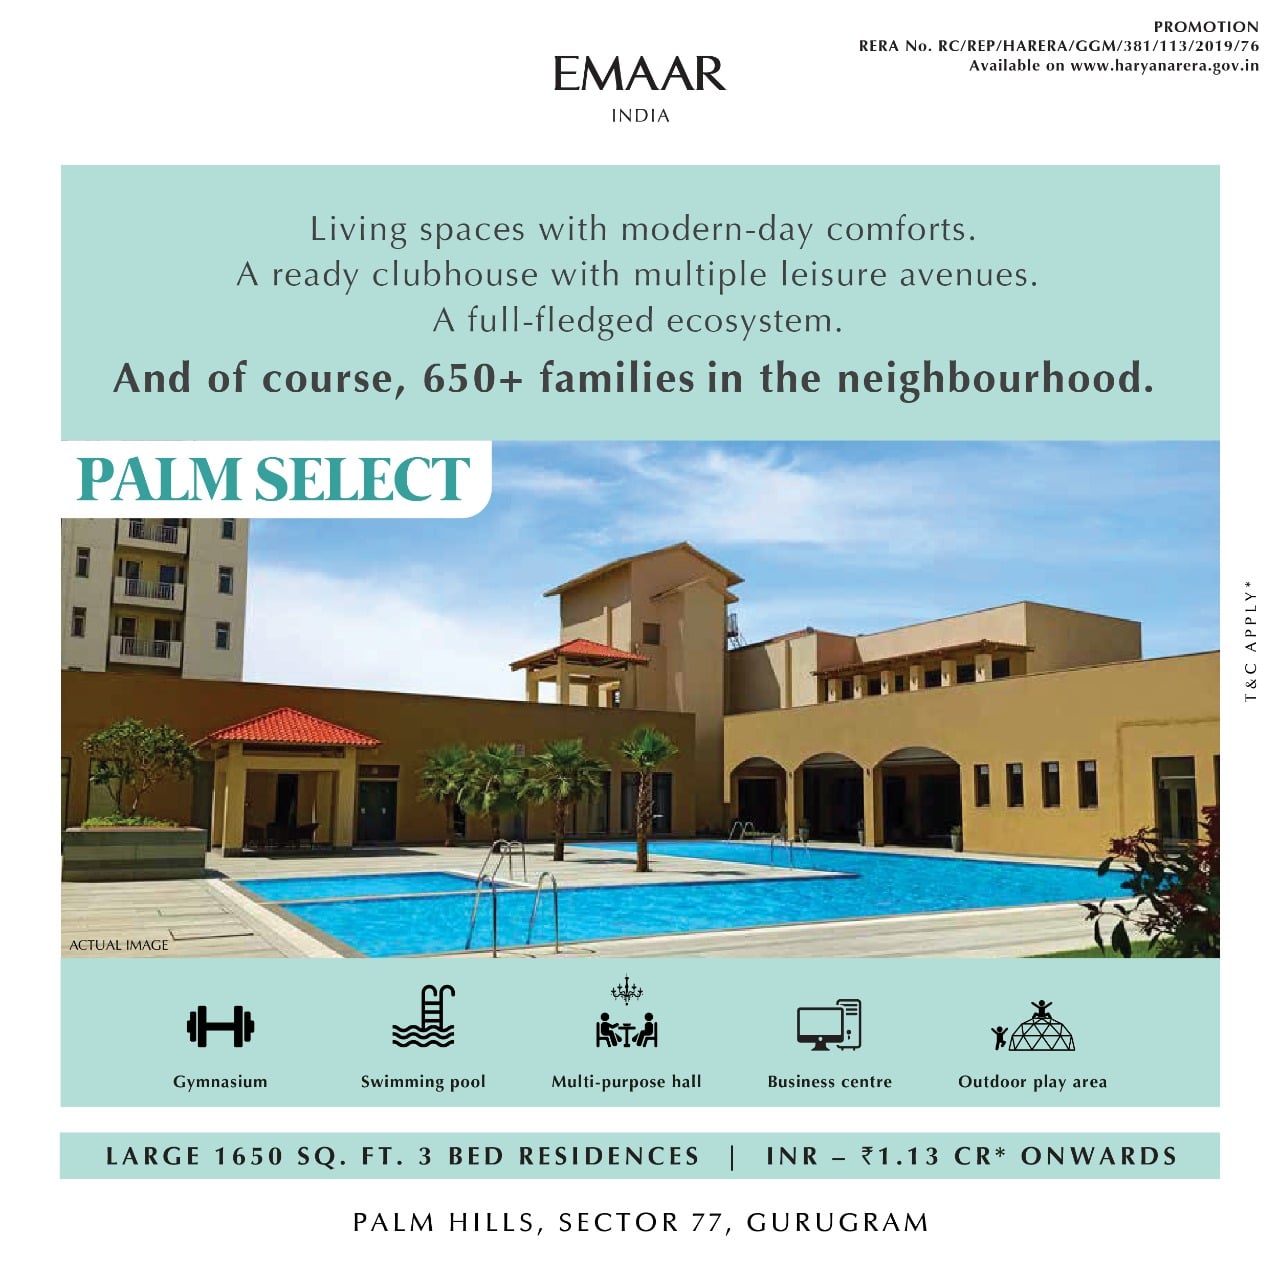 A ready clubhouse with multiple leisure avenues at Emaar Palm Select, Gurgaon